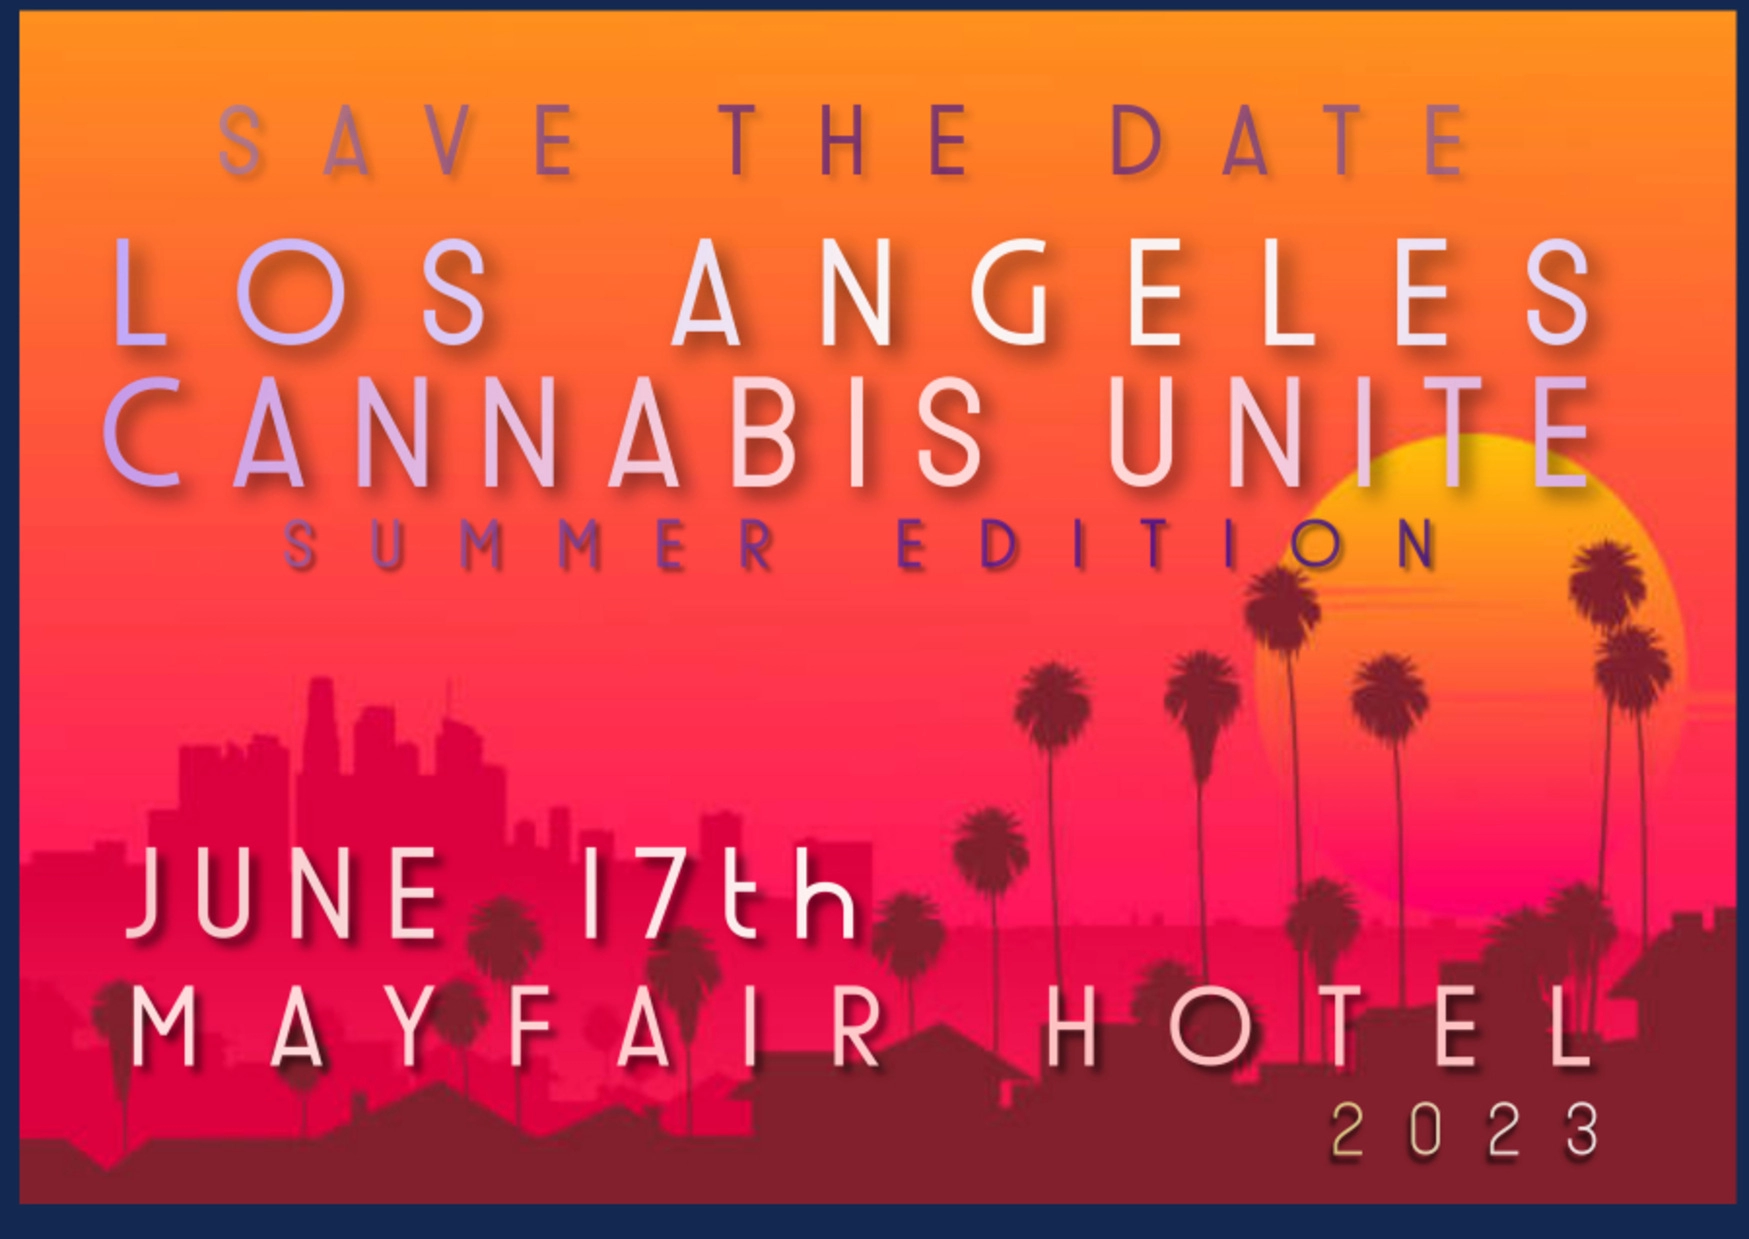 SAVE THE DATE: Los Angeles Canabis Unite, Summer Edition. June 17tj, 2023. Mayfair Hotel